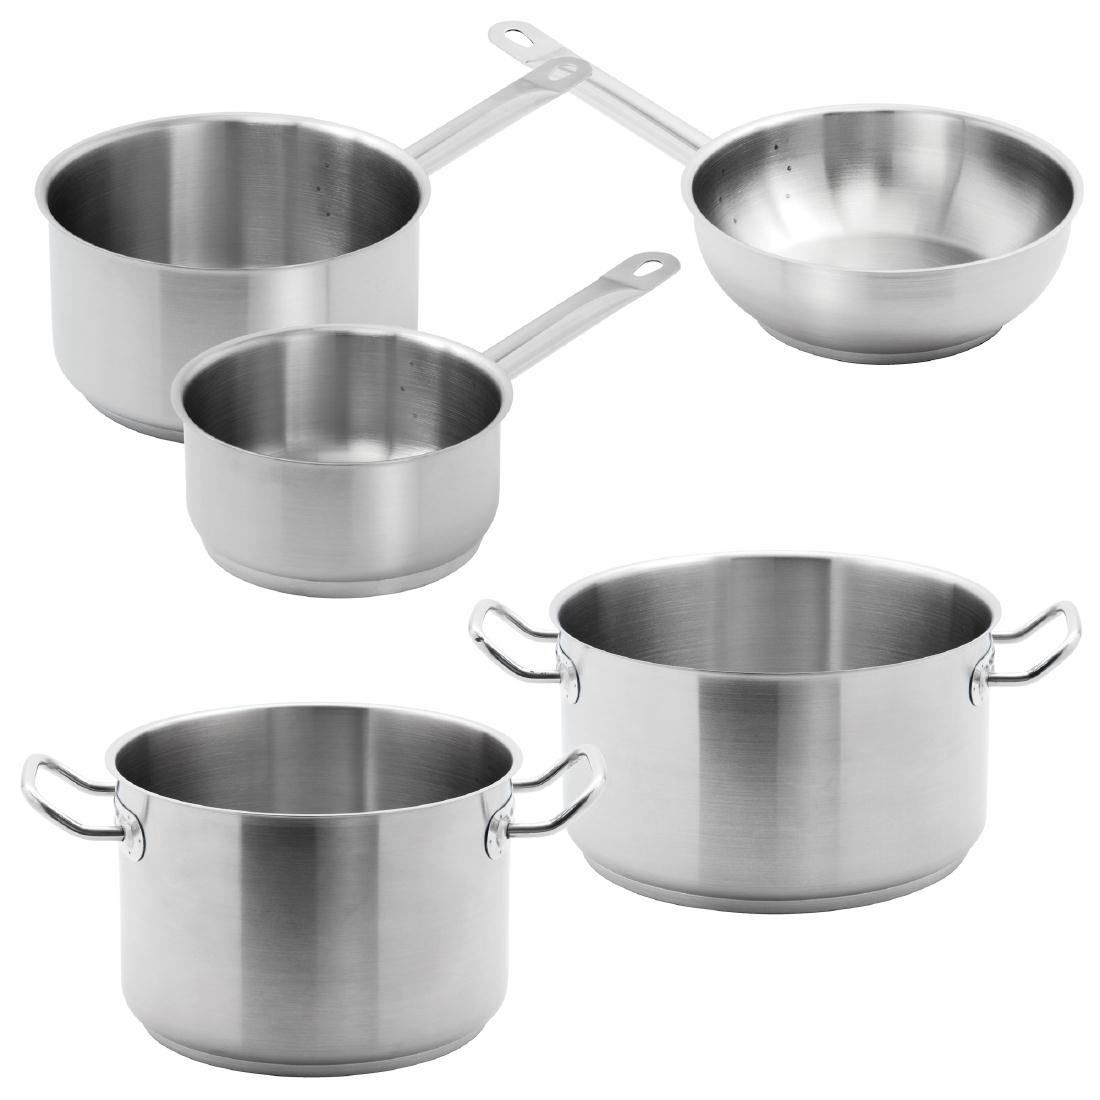 Special Offer - 5 Vogue Pack Of Casserole, Stew And Saute Pans